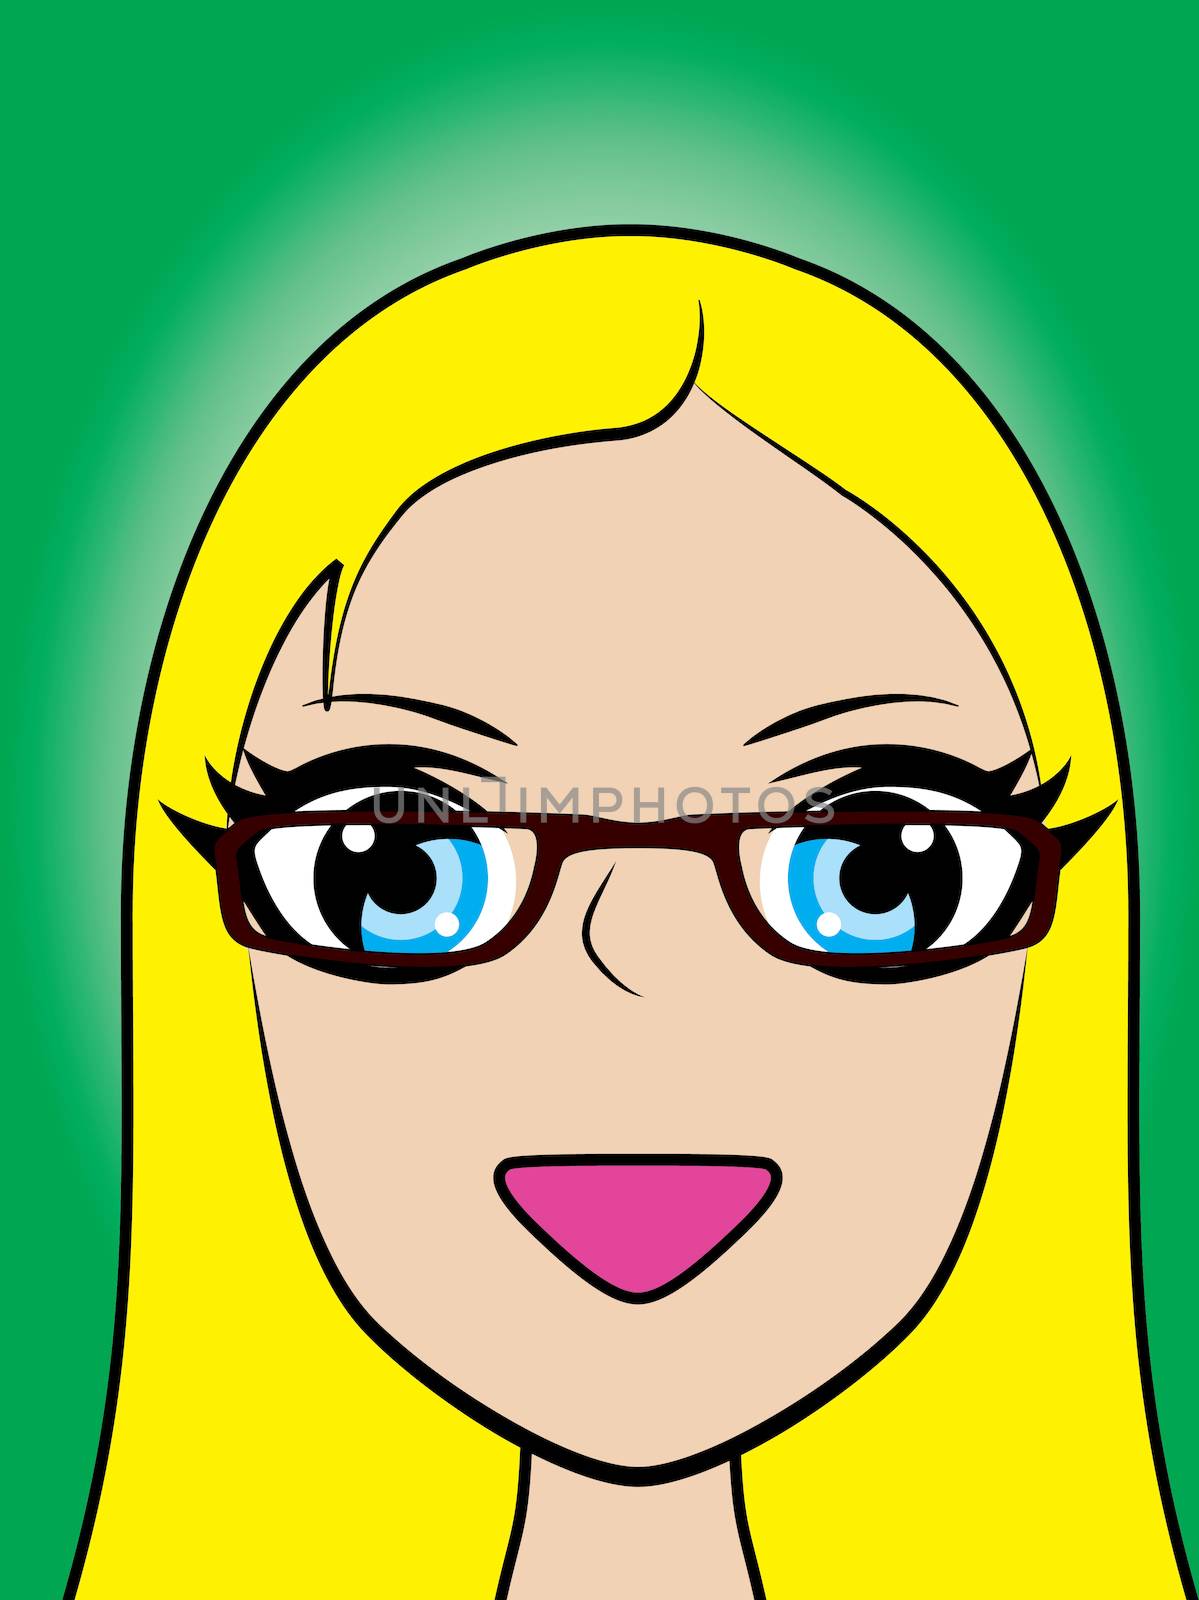 An Illustration of Pop art style womans face with space for text